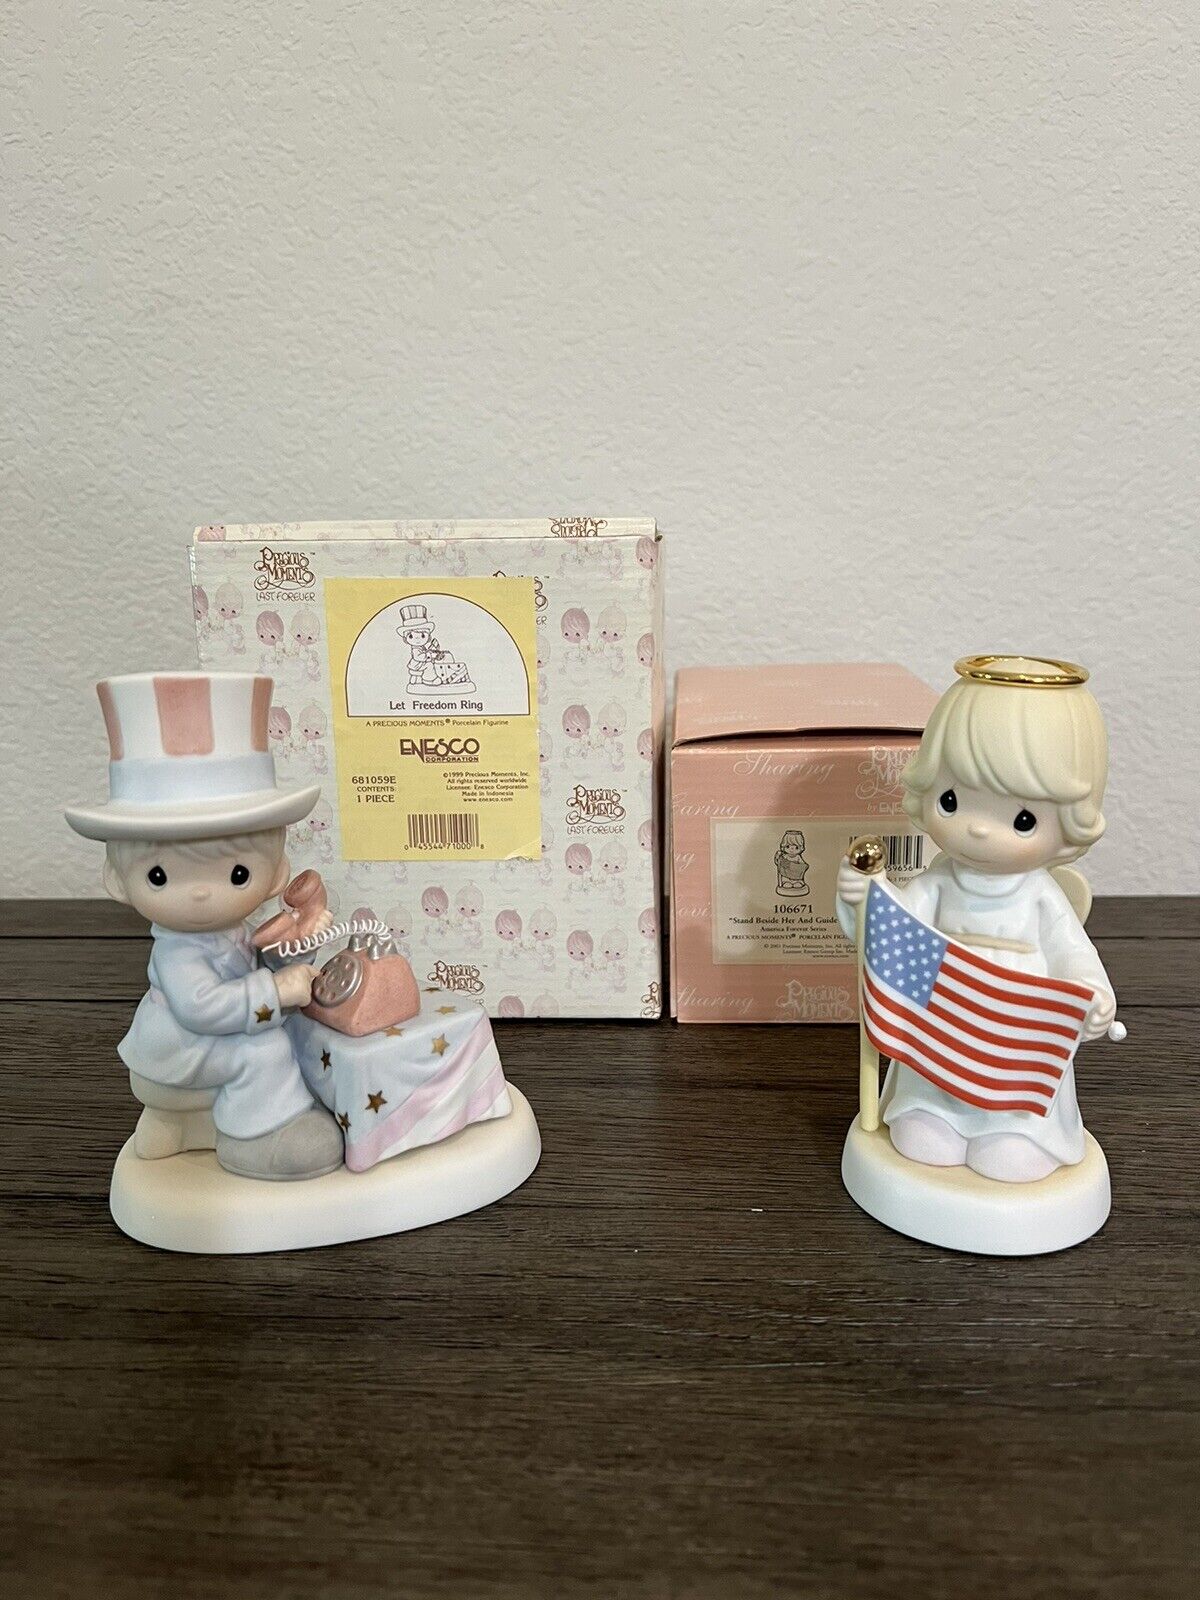 Precious Moments Patriotic Figurines-STAND BESIDE HER & LET FREEDOM RING